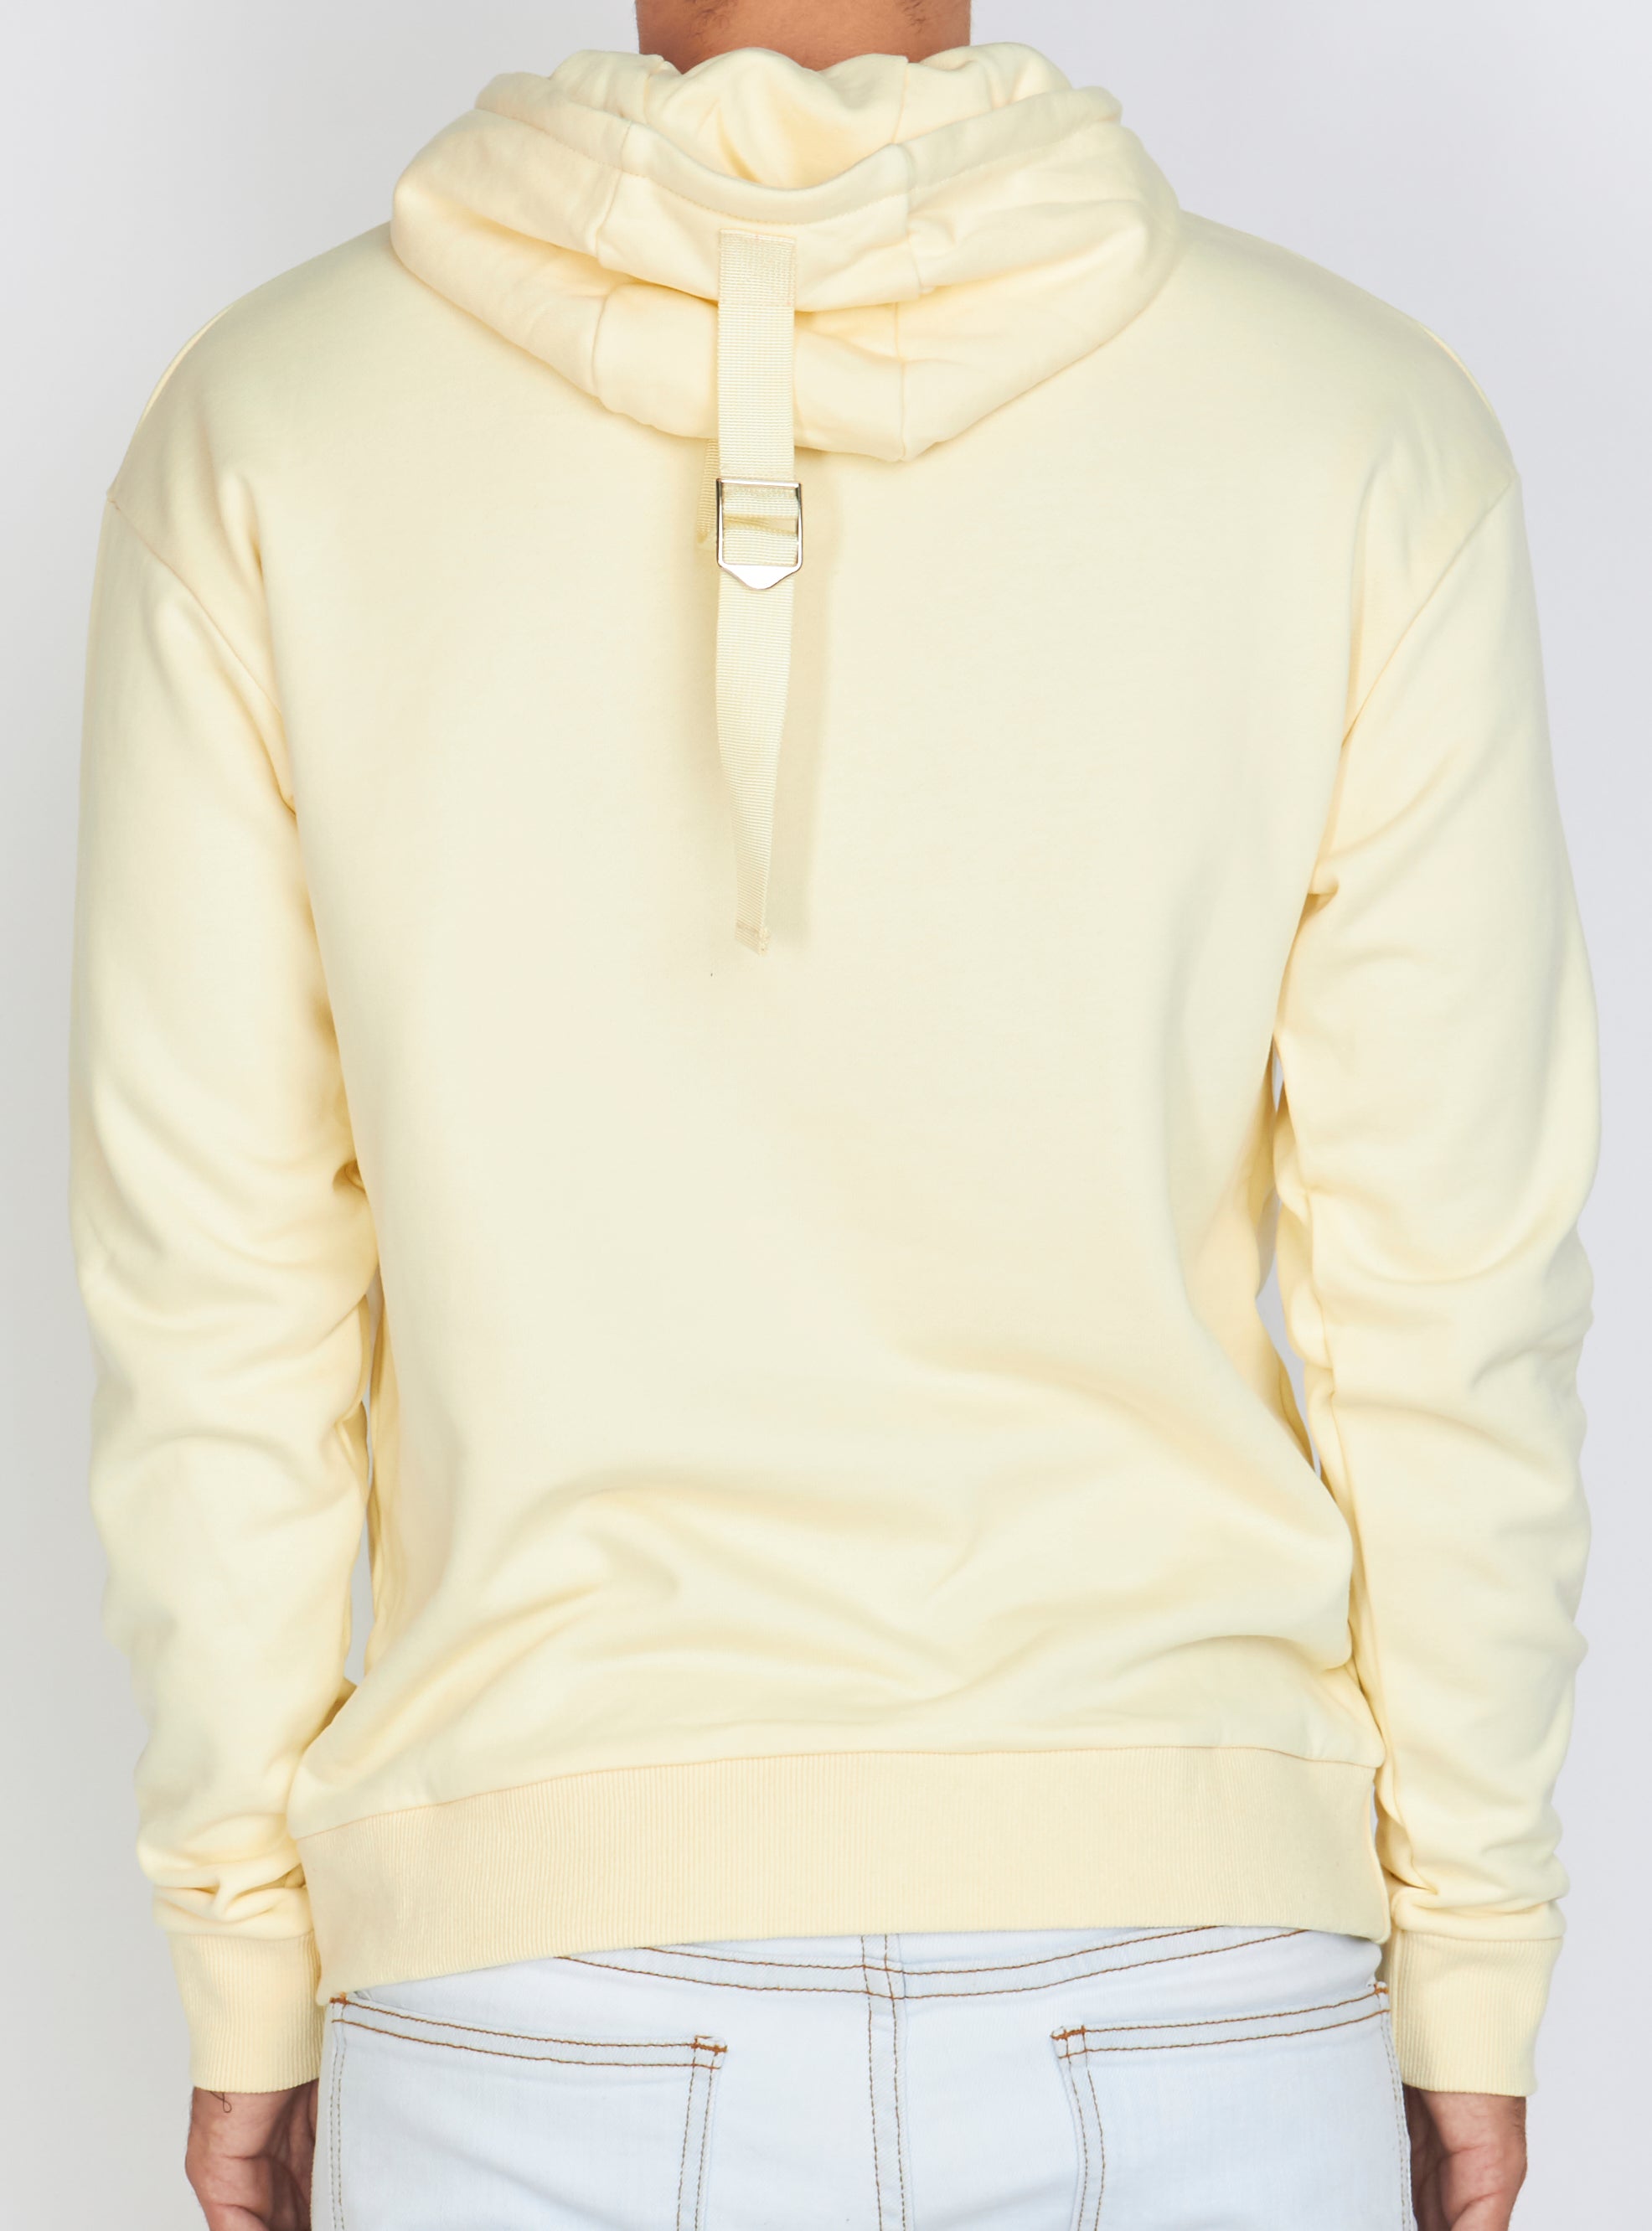 Hoodie - Crest Pullover - Bone and Olive - LLCH603